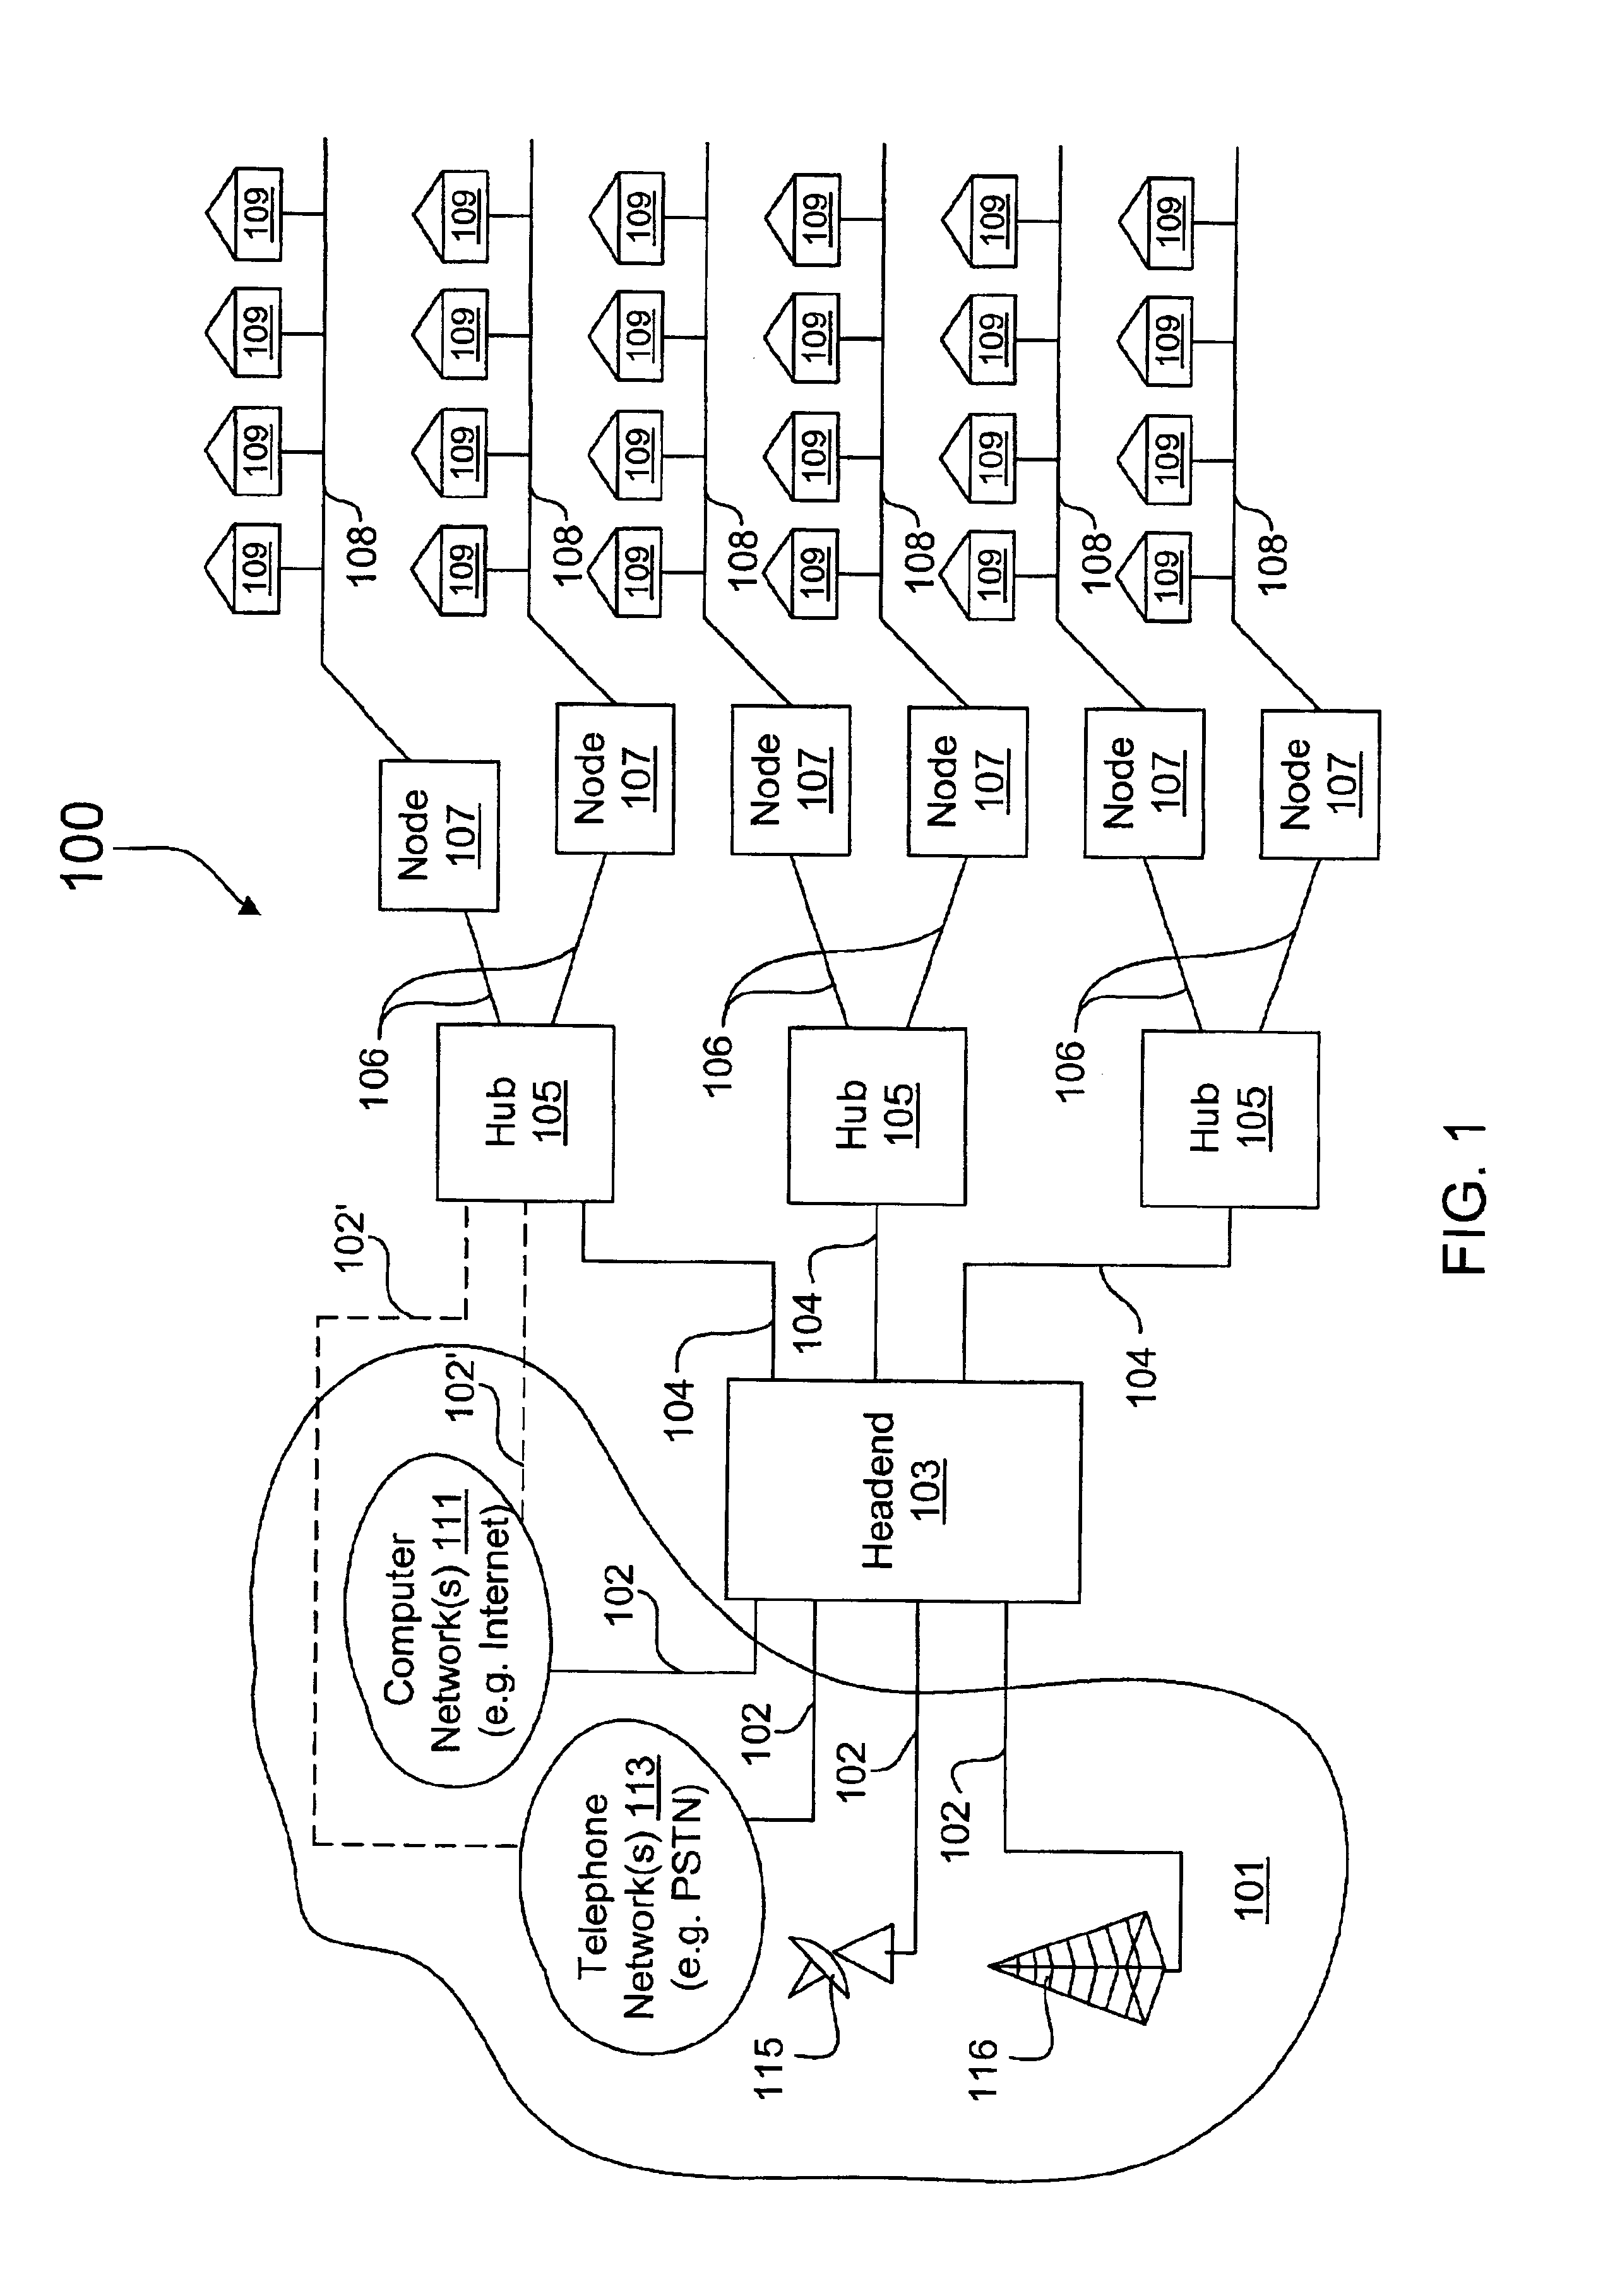 Distributed block frequency converter